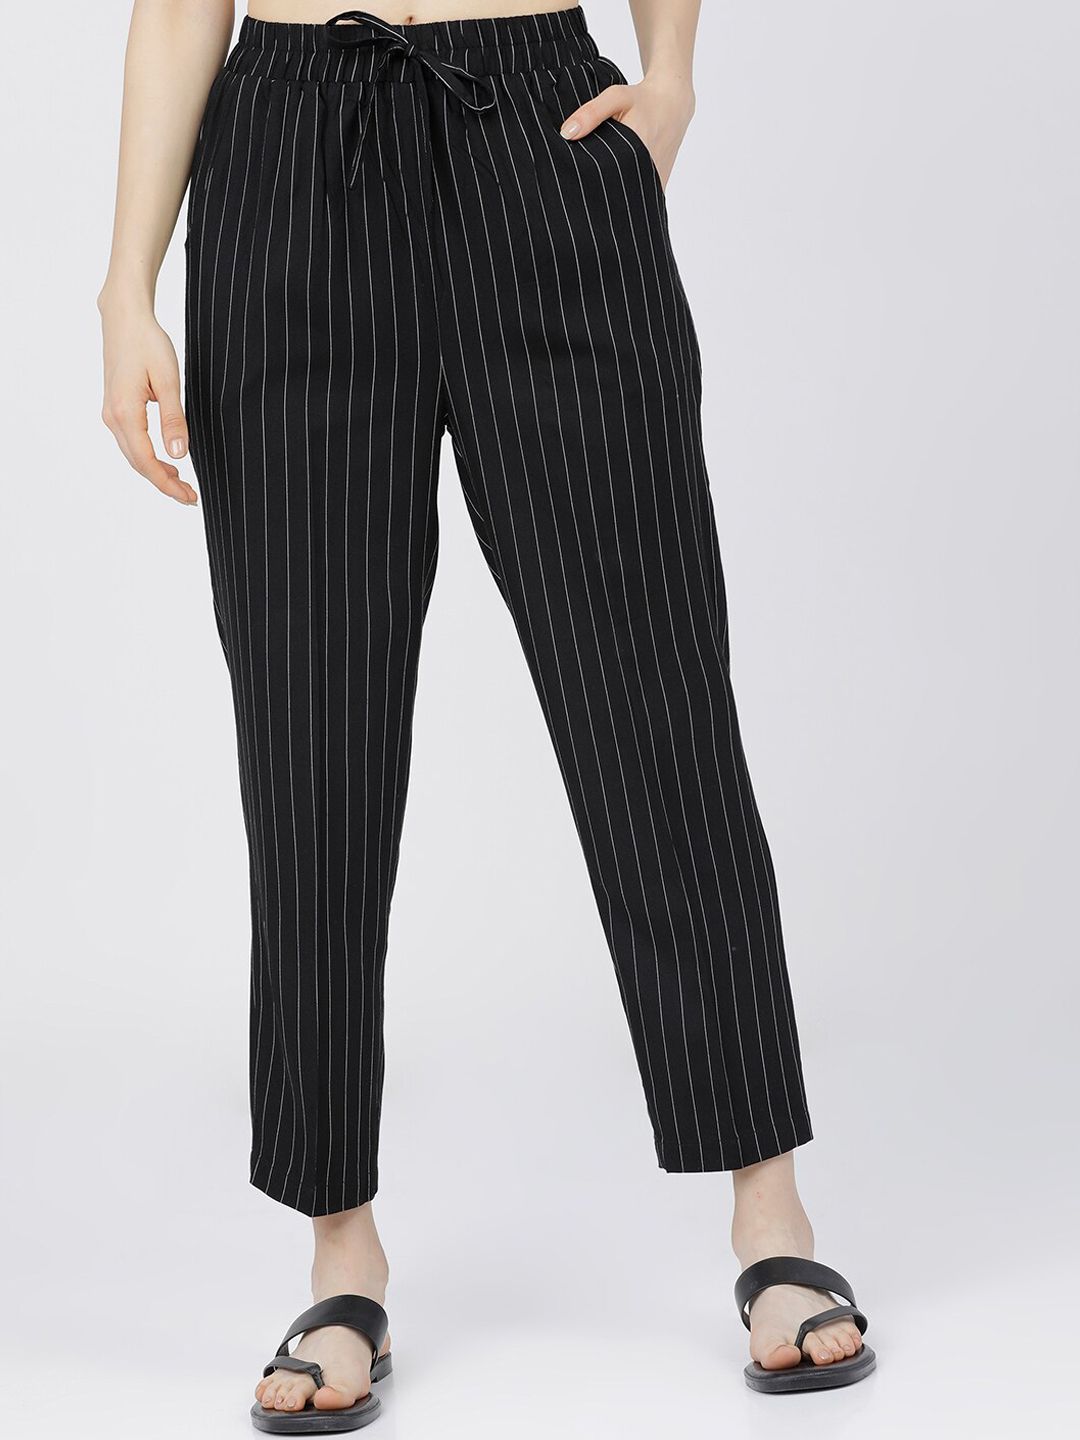 Tokyo Talkies Women Black Striped Pleated Trousers Price in India